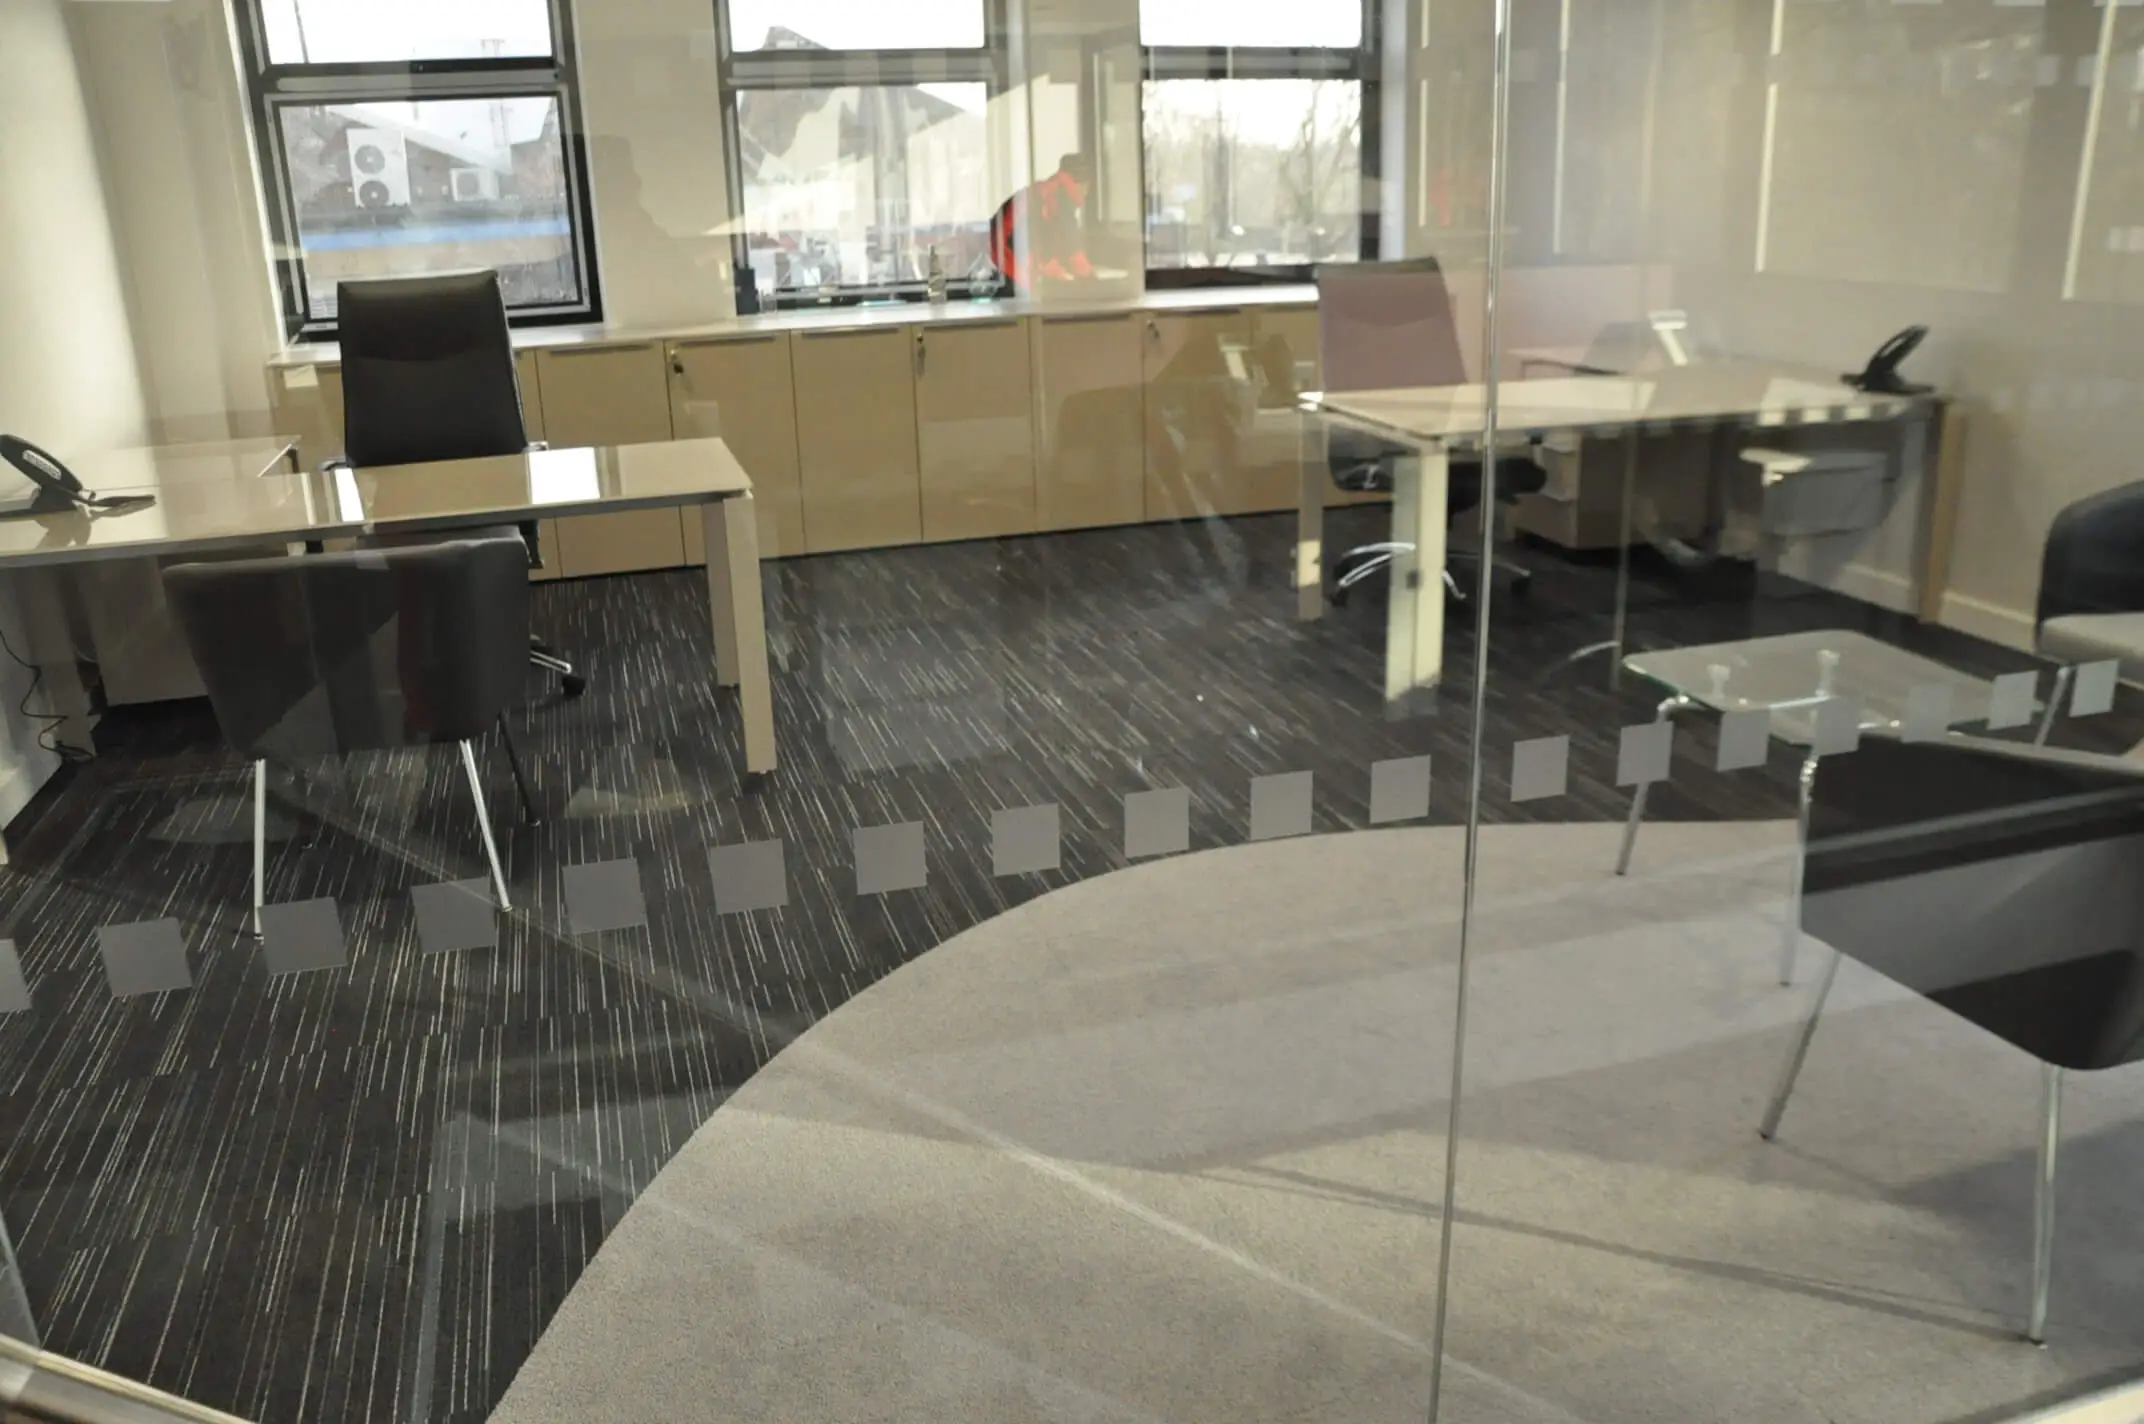 Private space with dotted glass manifestation and office desks and chairs